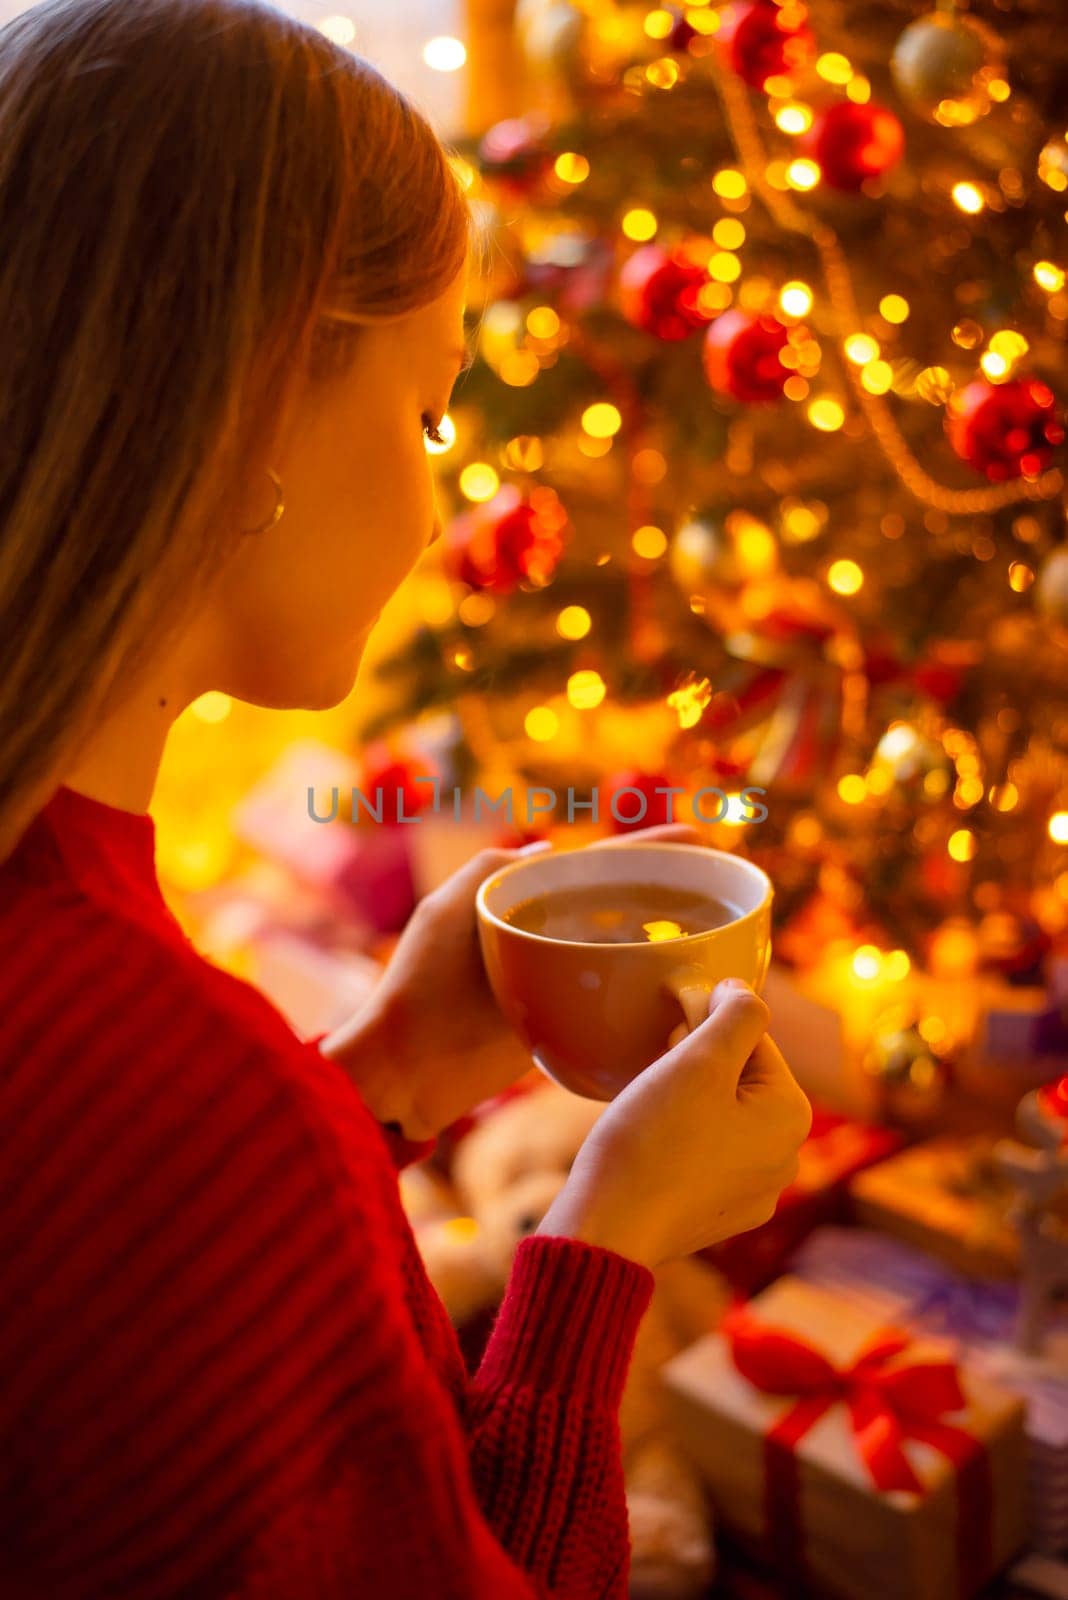 Young girl drinking tea and relaxing near the Christmas tree